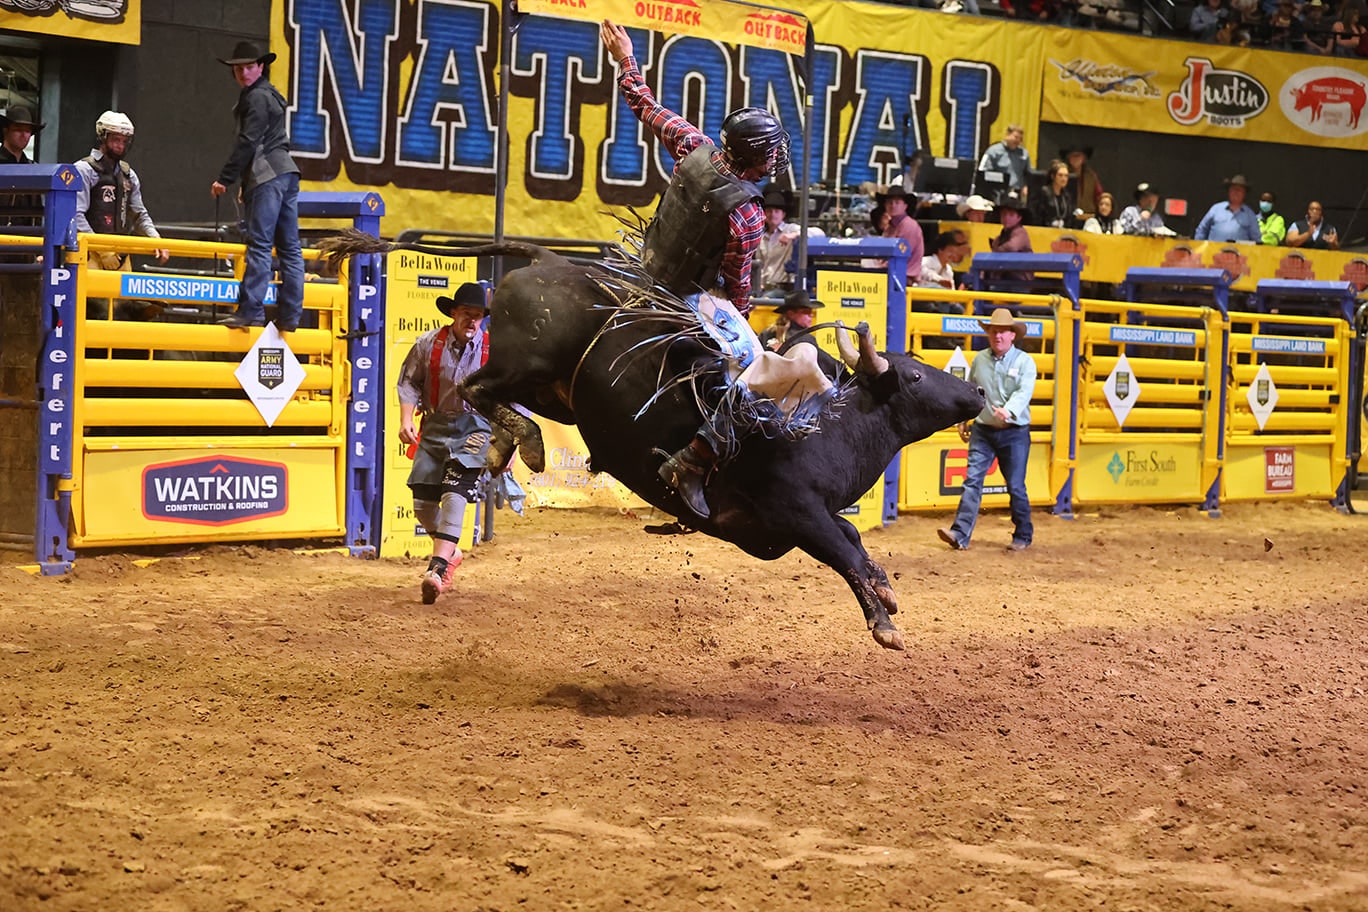 Dixie National Livestock Show and Rodeo kicks off in Jackson